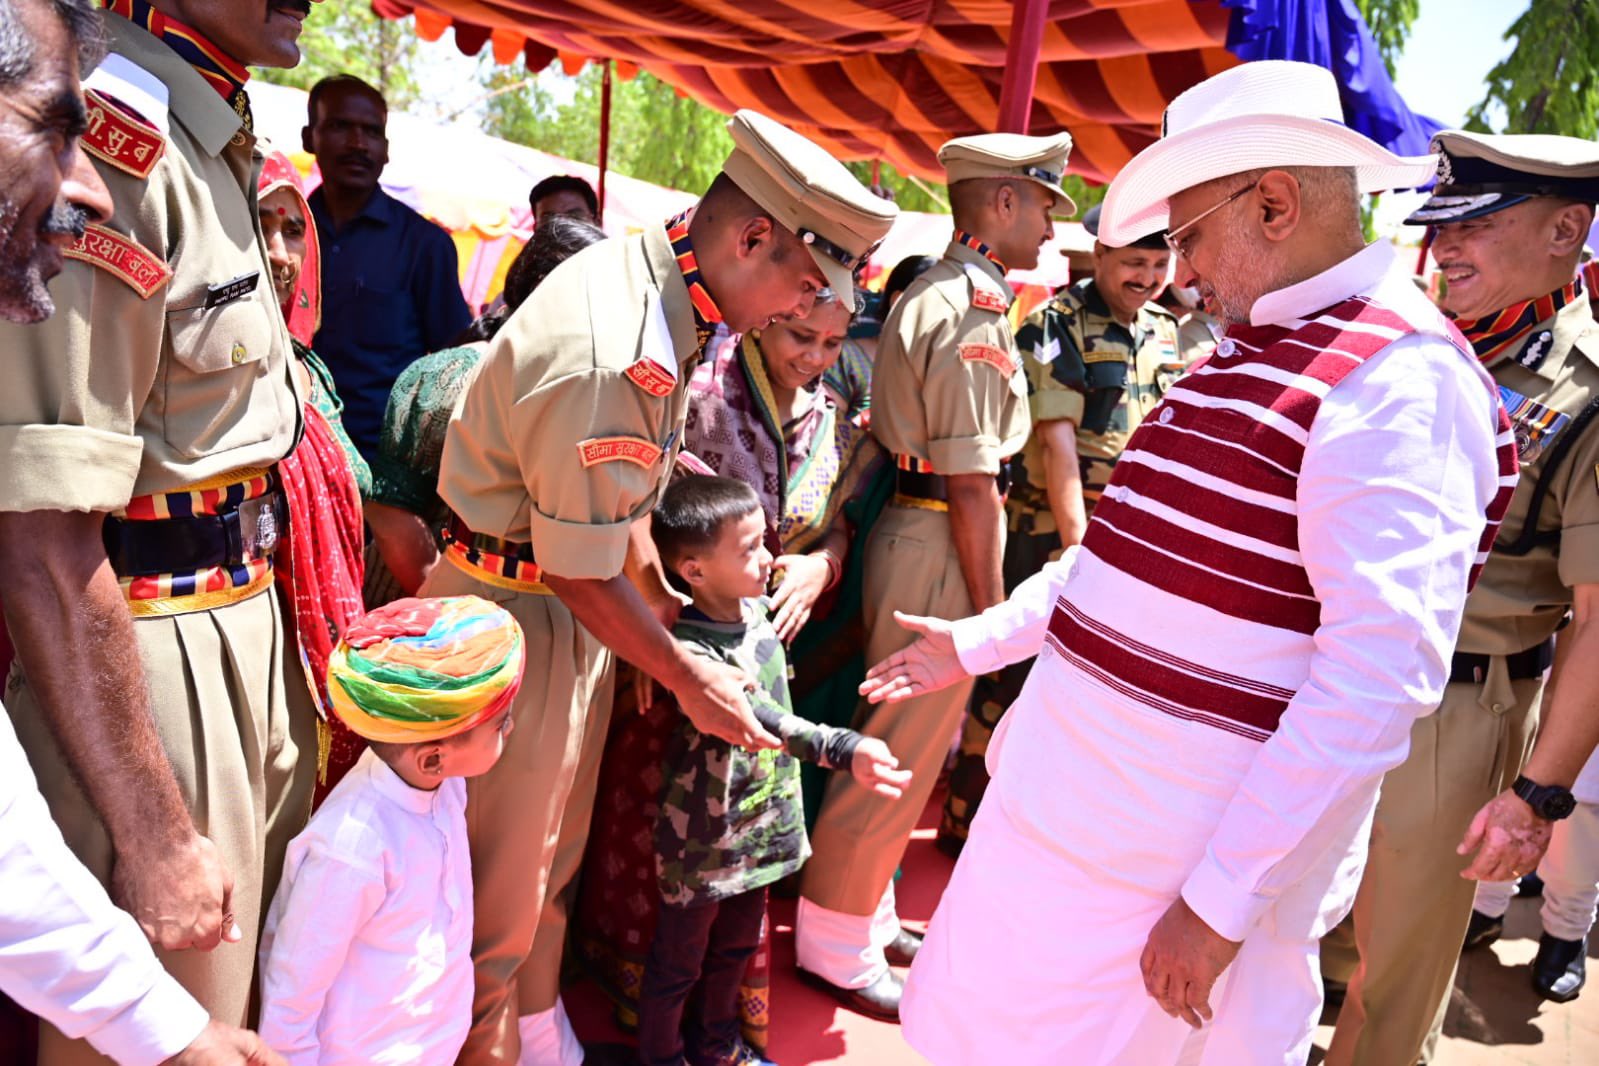 BSF का गौरवशाली इतिहास पर हम सभी को है गर्व: राज्यपाल- We all are proud of the glorious history of BSF: Governor